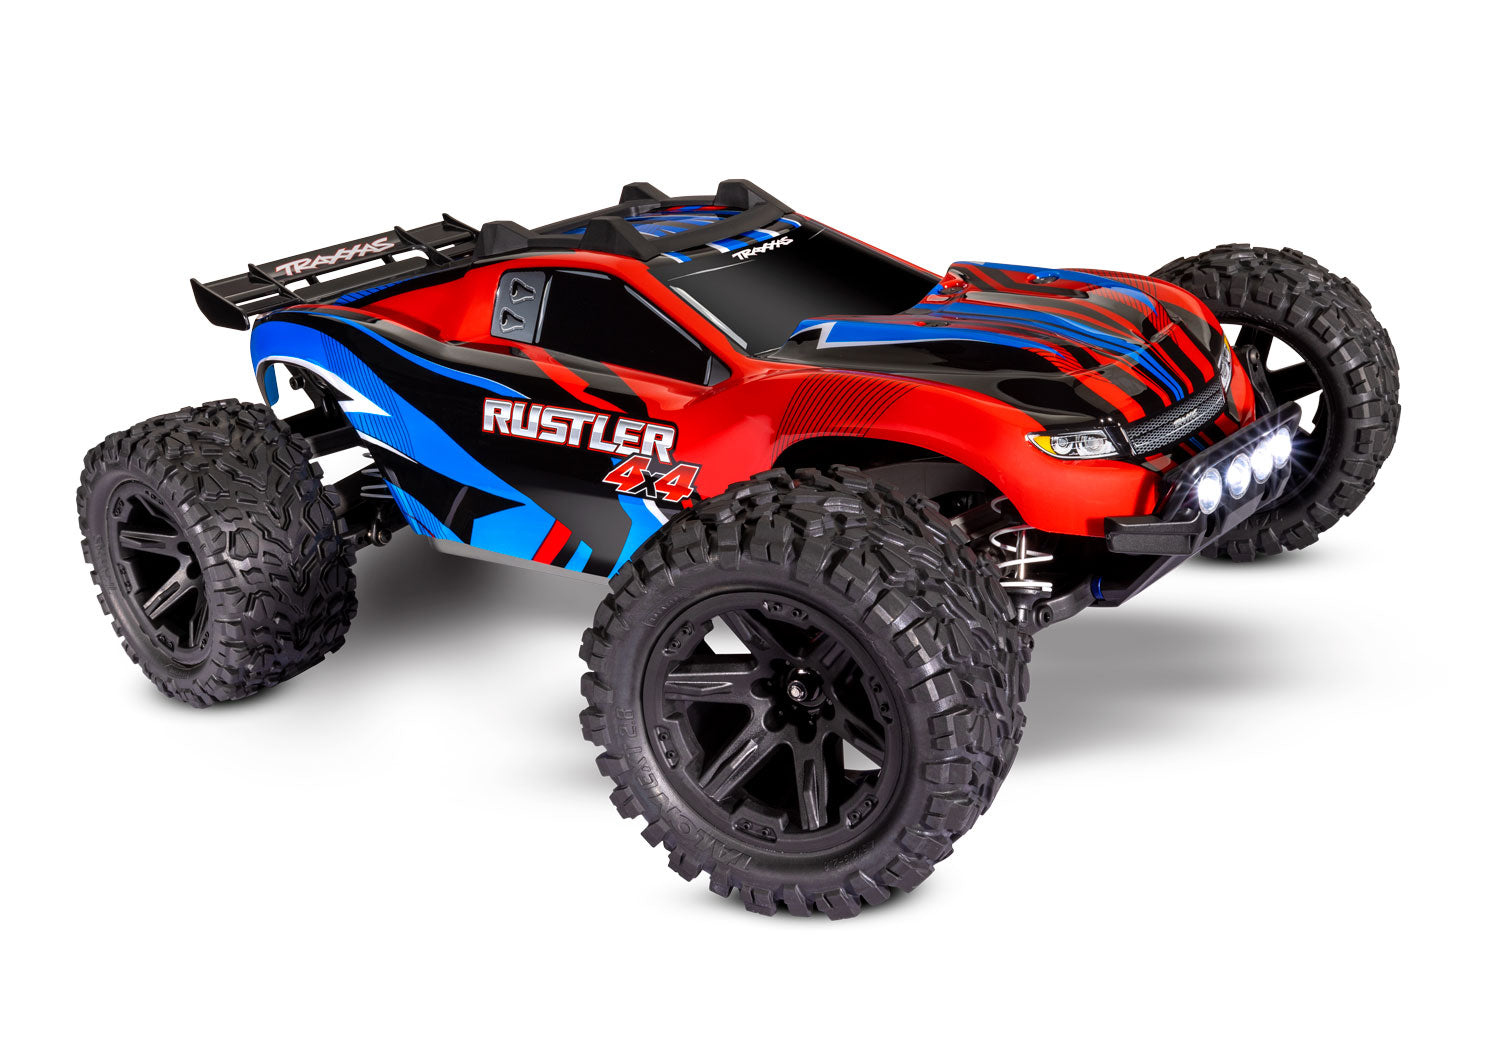 TRAXXAS 67064-61 Rustler 4X4® 1/10 scale waterproof 4WD stadium truck. RTR, with TQ™ 2.4GHz radio system, XL-5® Electronic Speed Control, 8.4V NiMH 3000 mAh battery, 4-amp DC Charger, LED lighting, and painted body.